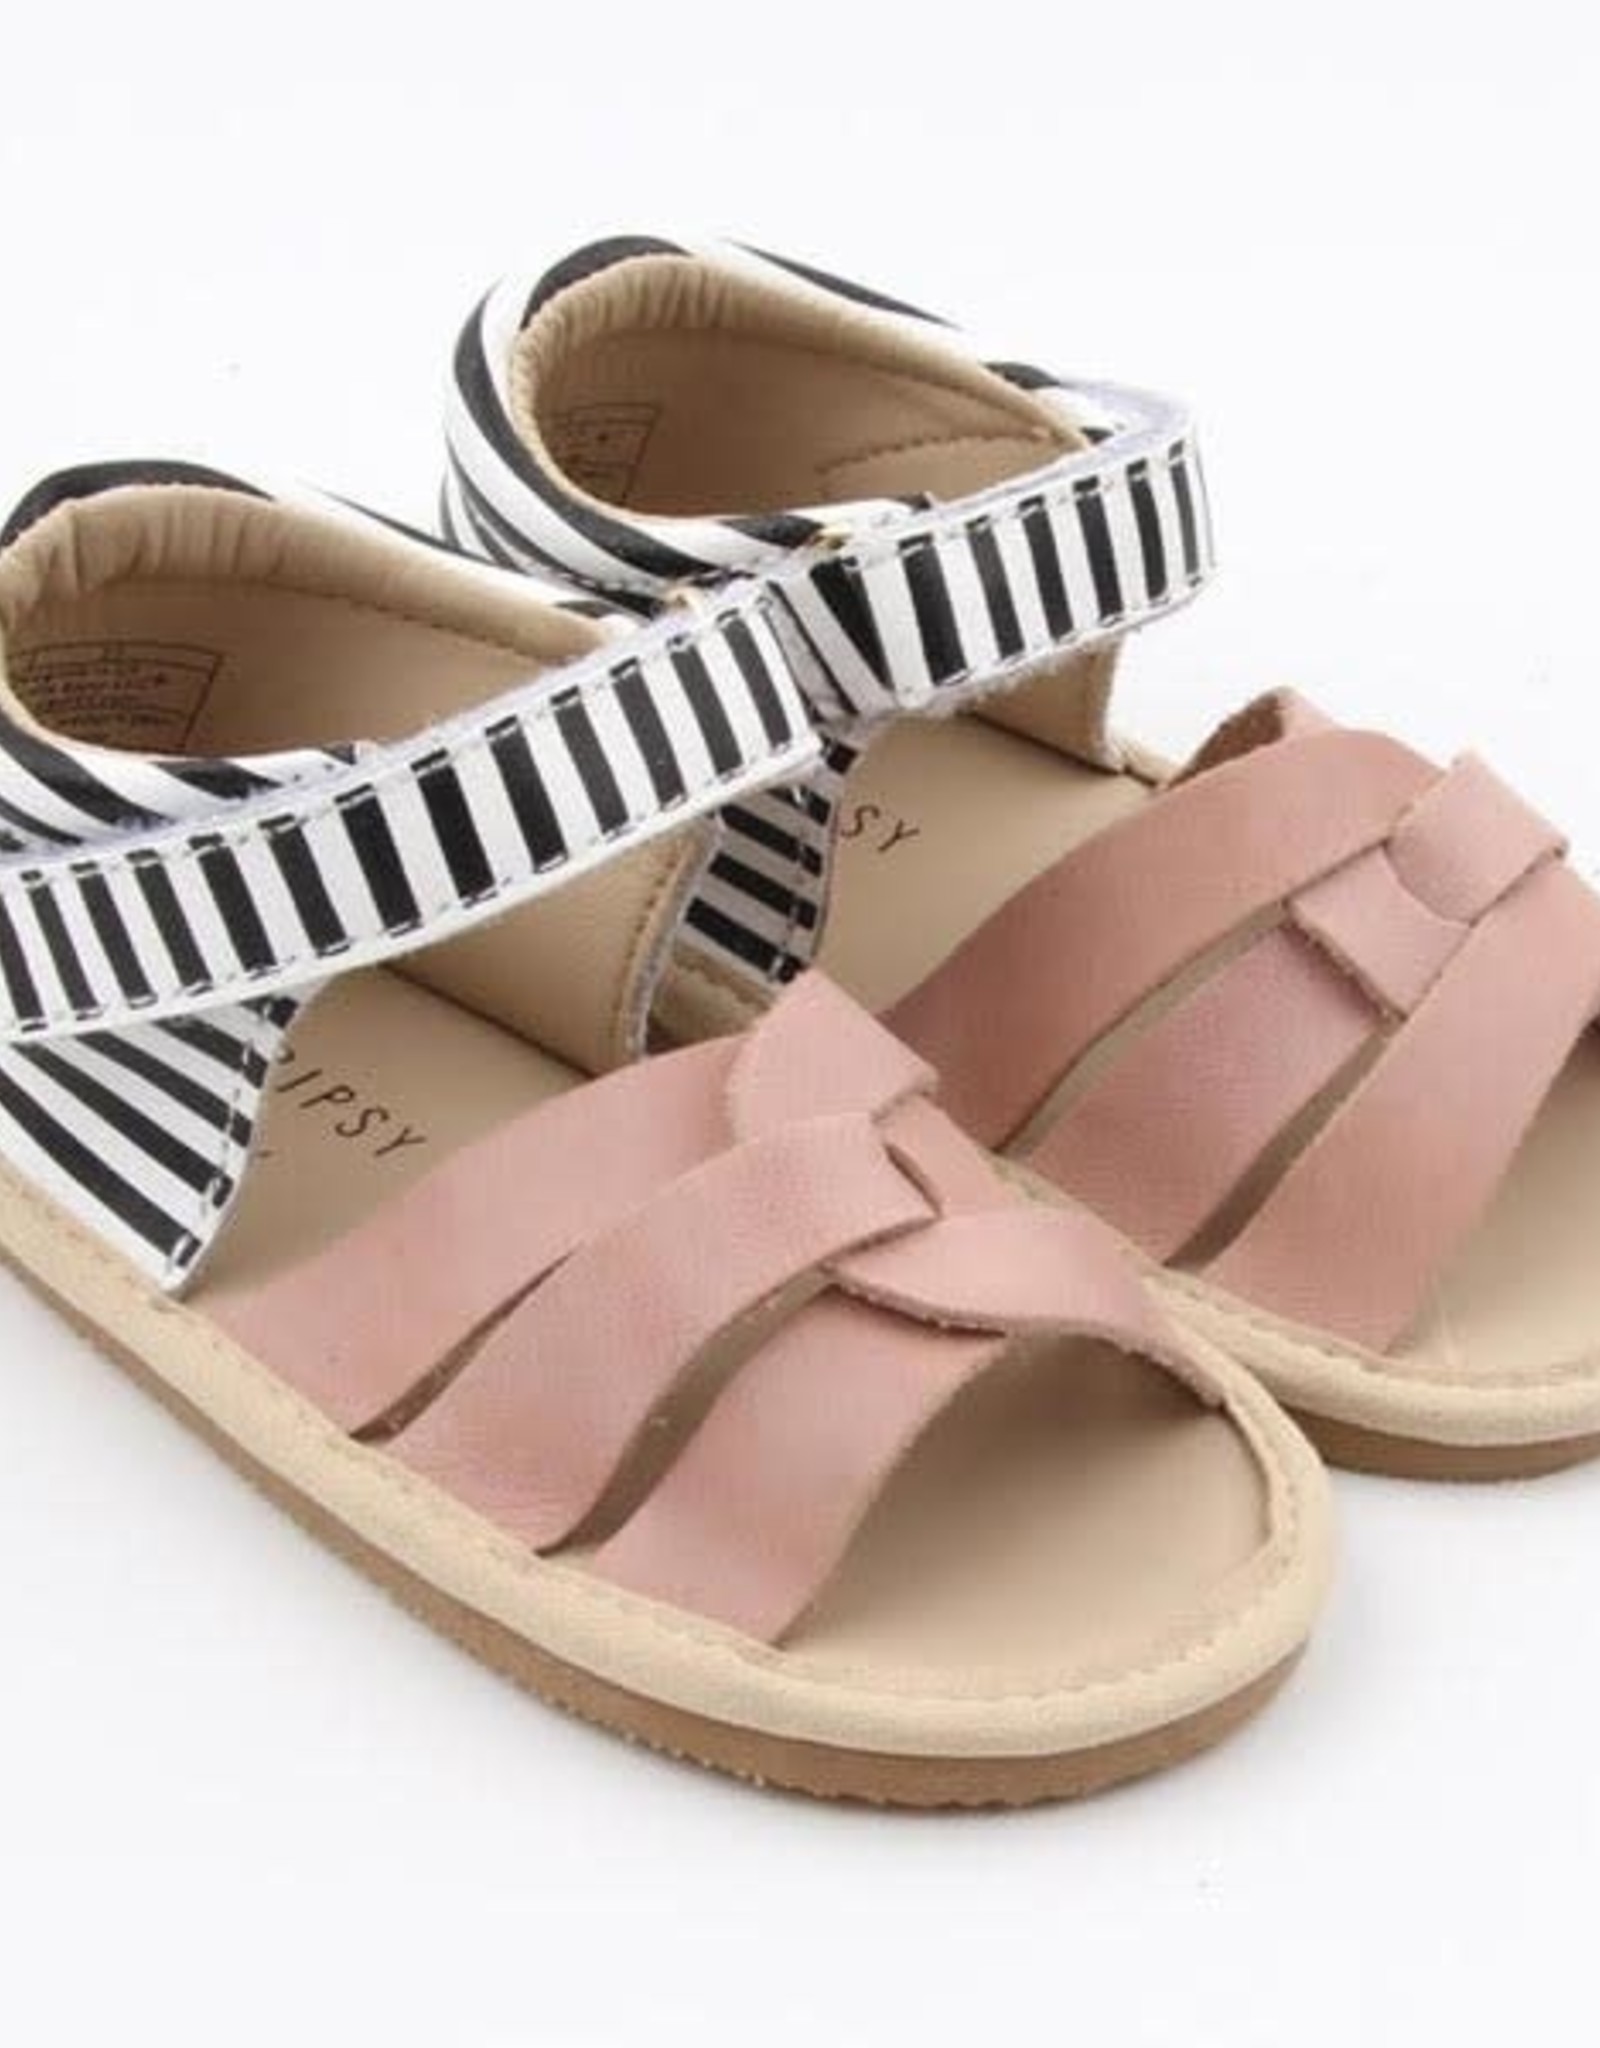 Little Bipsy Collection isla sandals- blush and black stripe